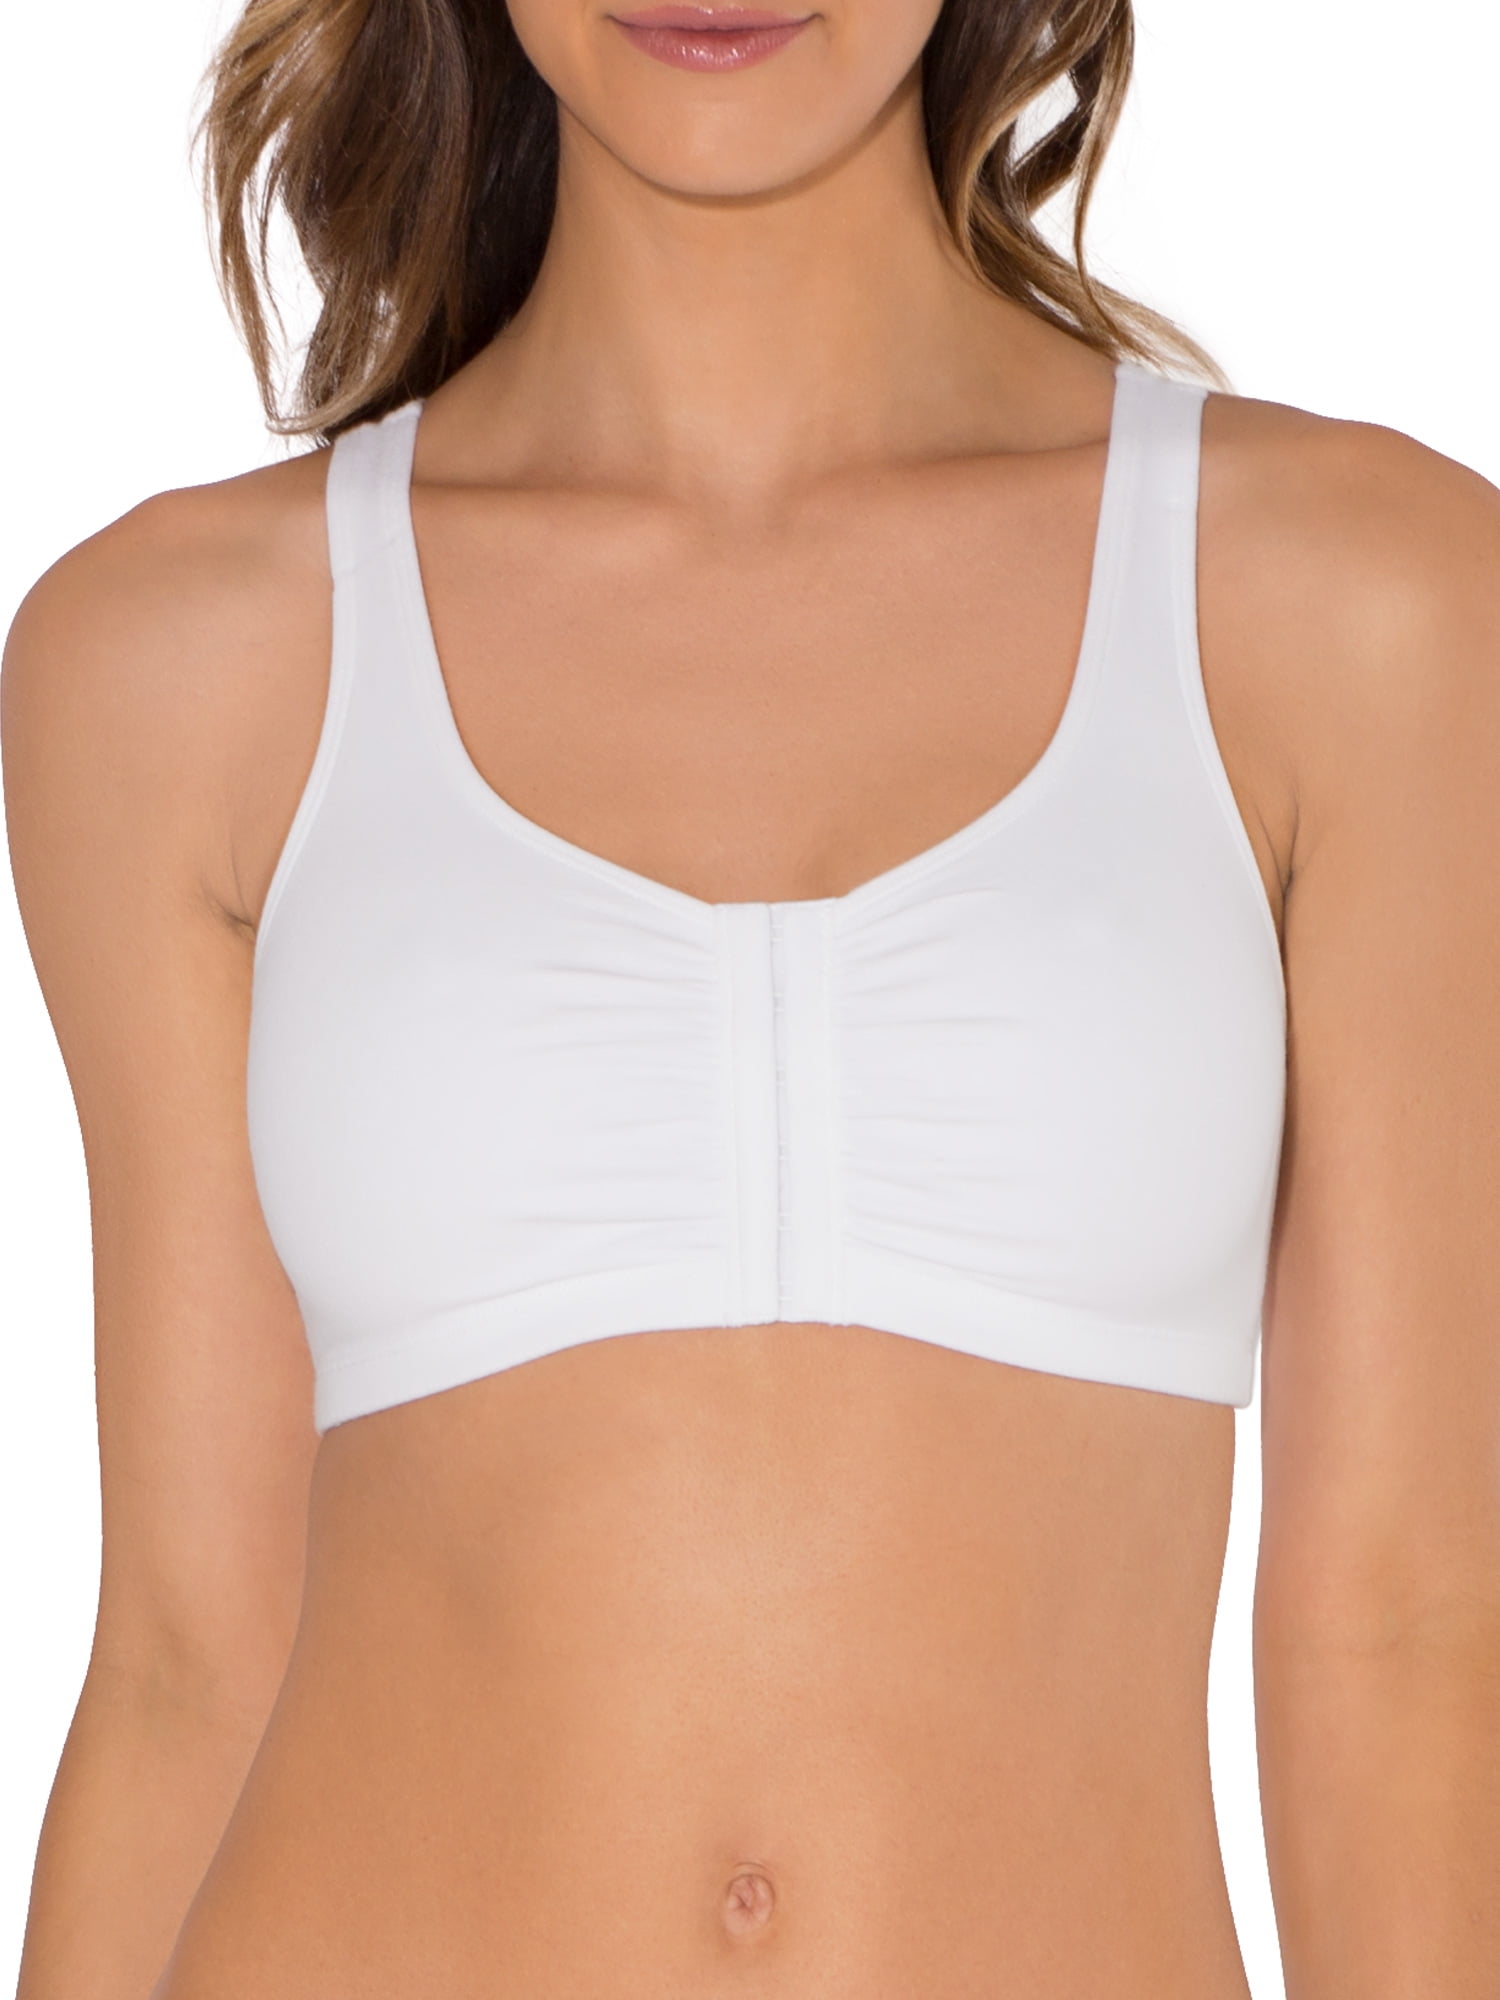 Fruit of the Loom 48 Band Bras & Bra Sets for Women for sale